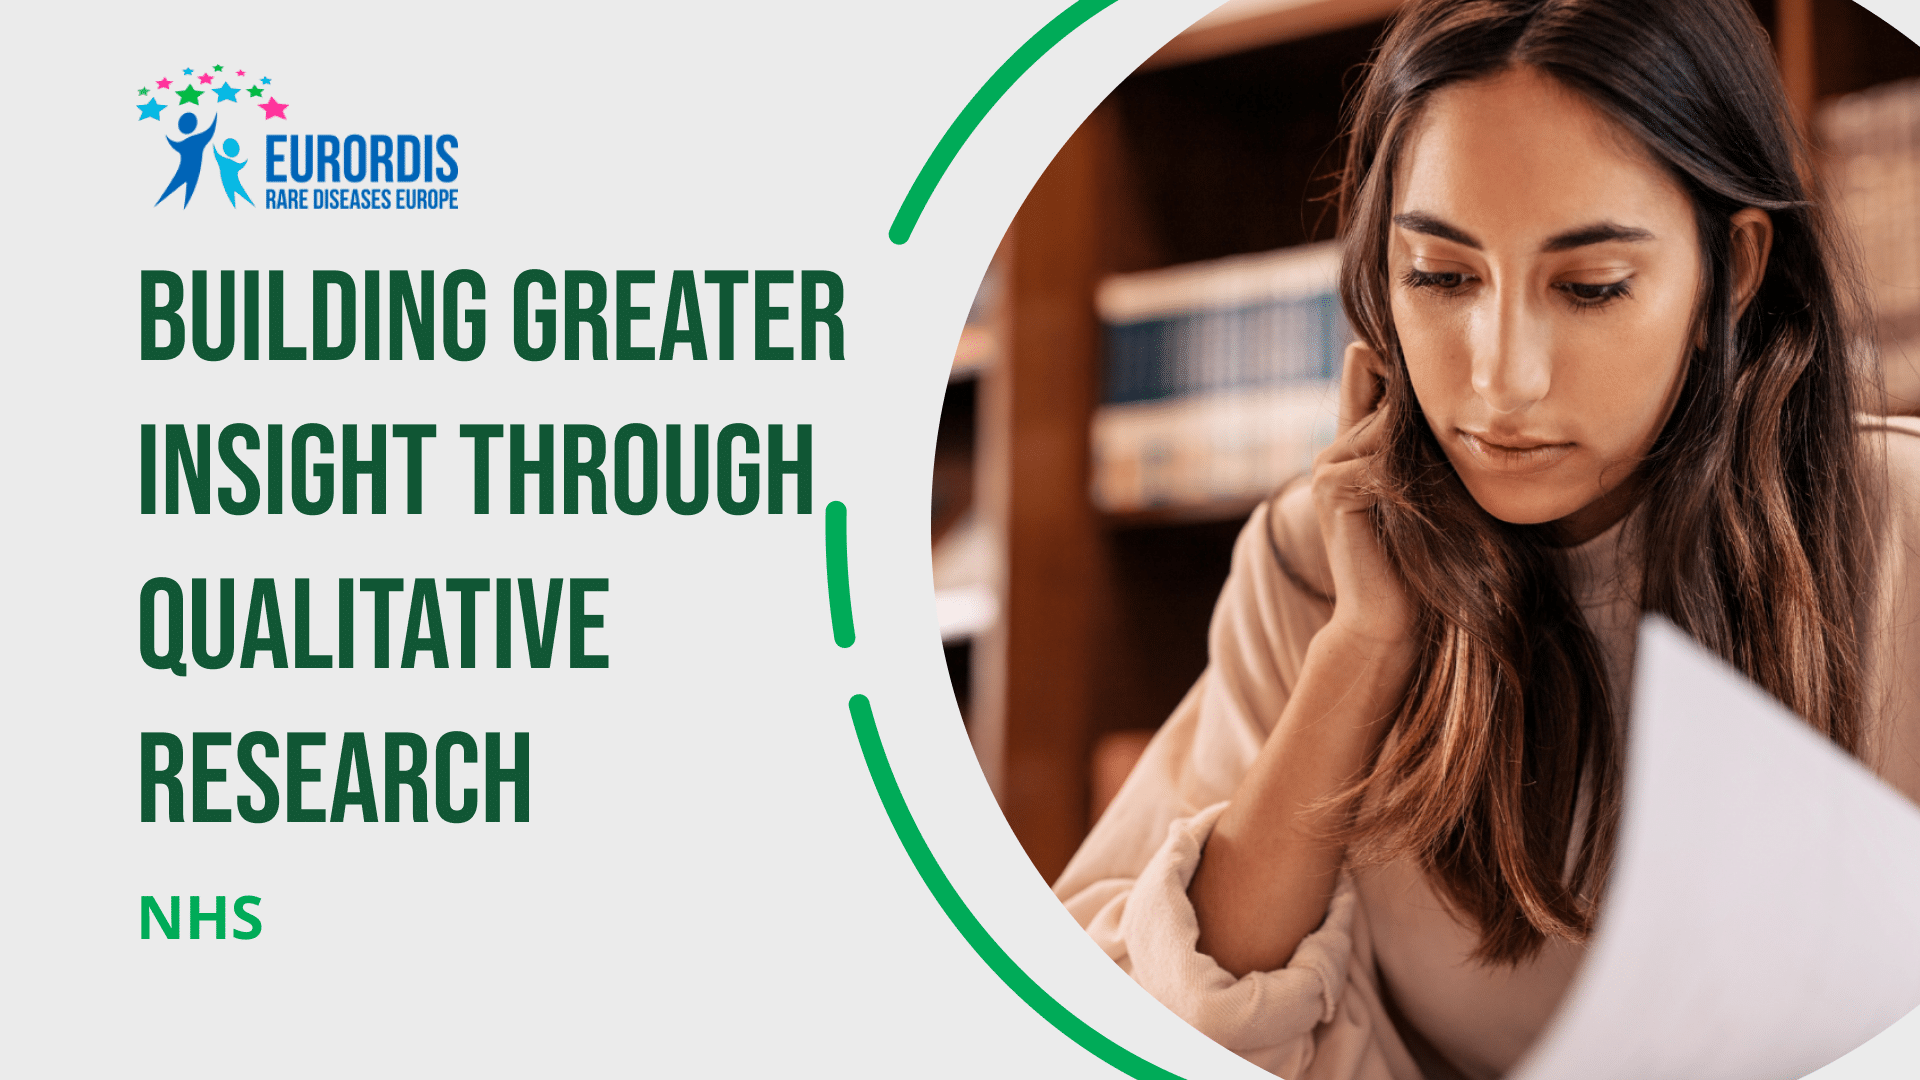 Building greater insight through Qualitative Research